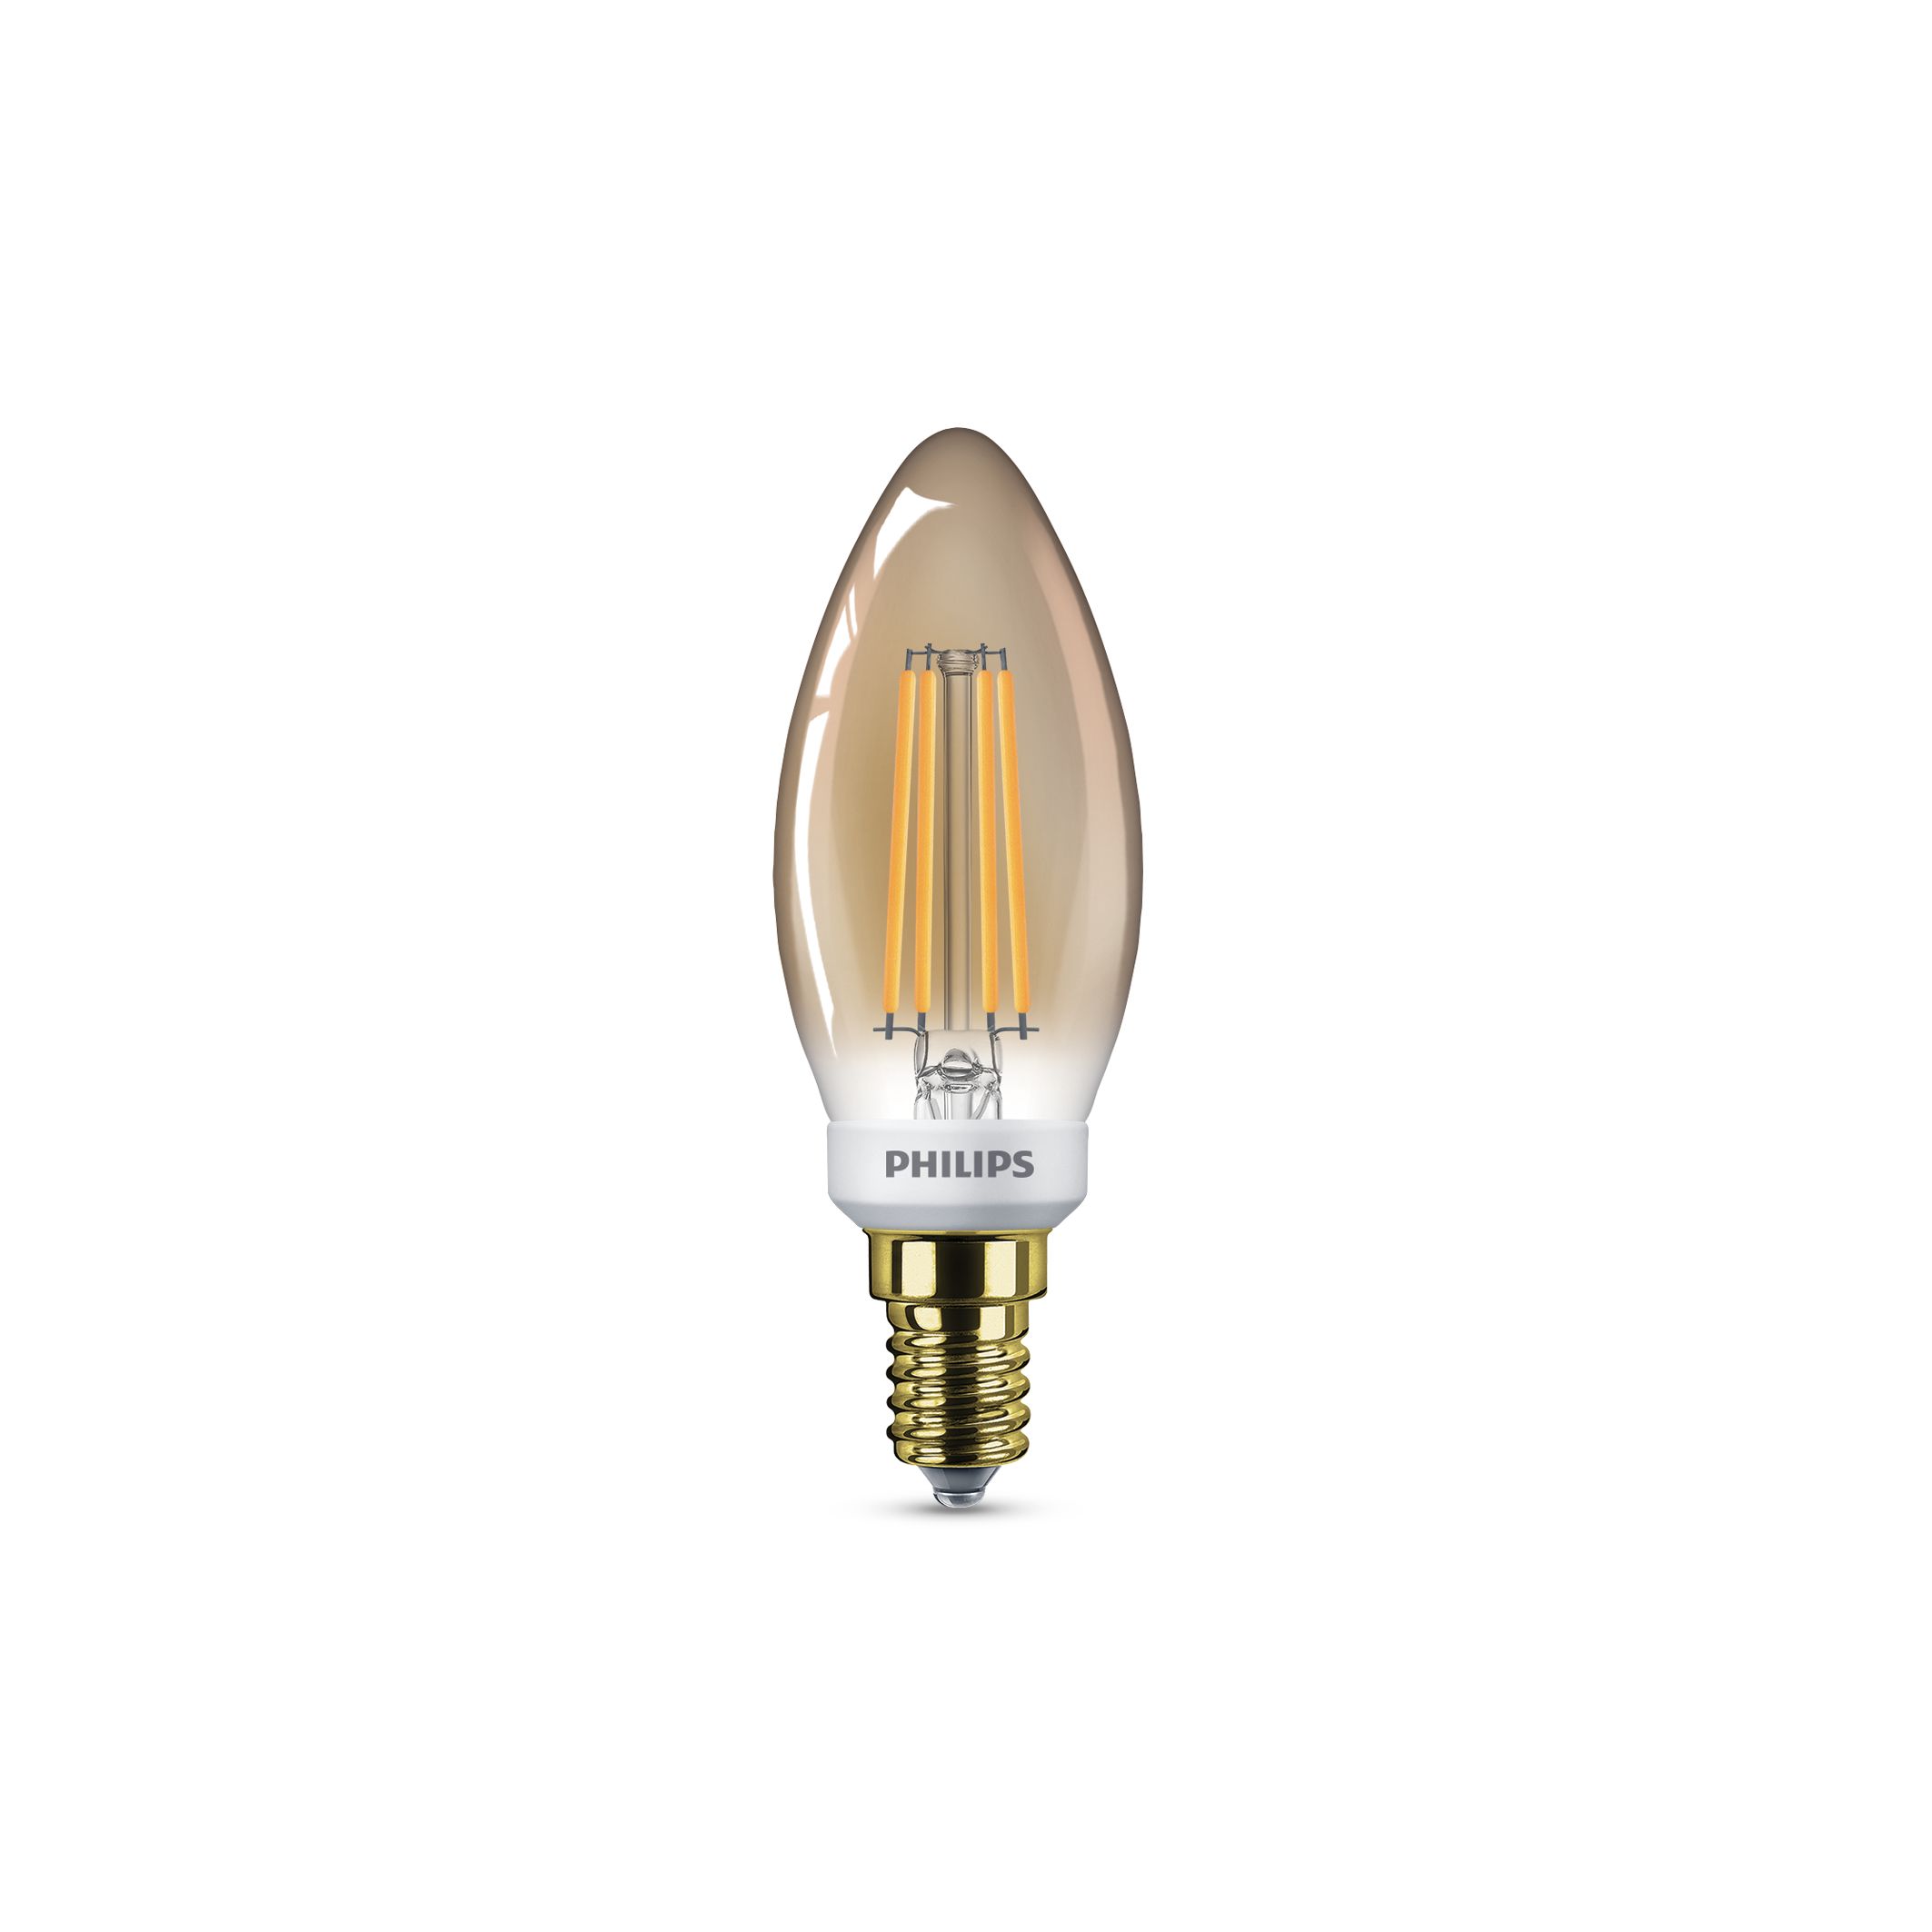 generatie stromen Vernauwd Master Value Decorative LED candles and lusters | 7178624 | Philips lighting